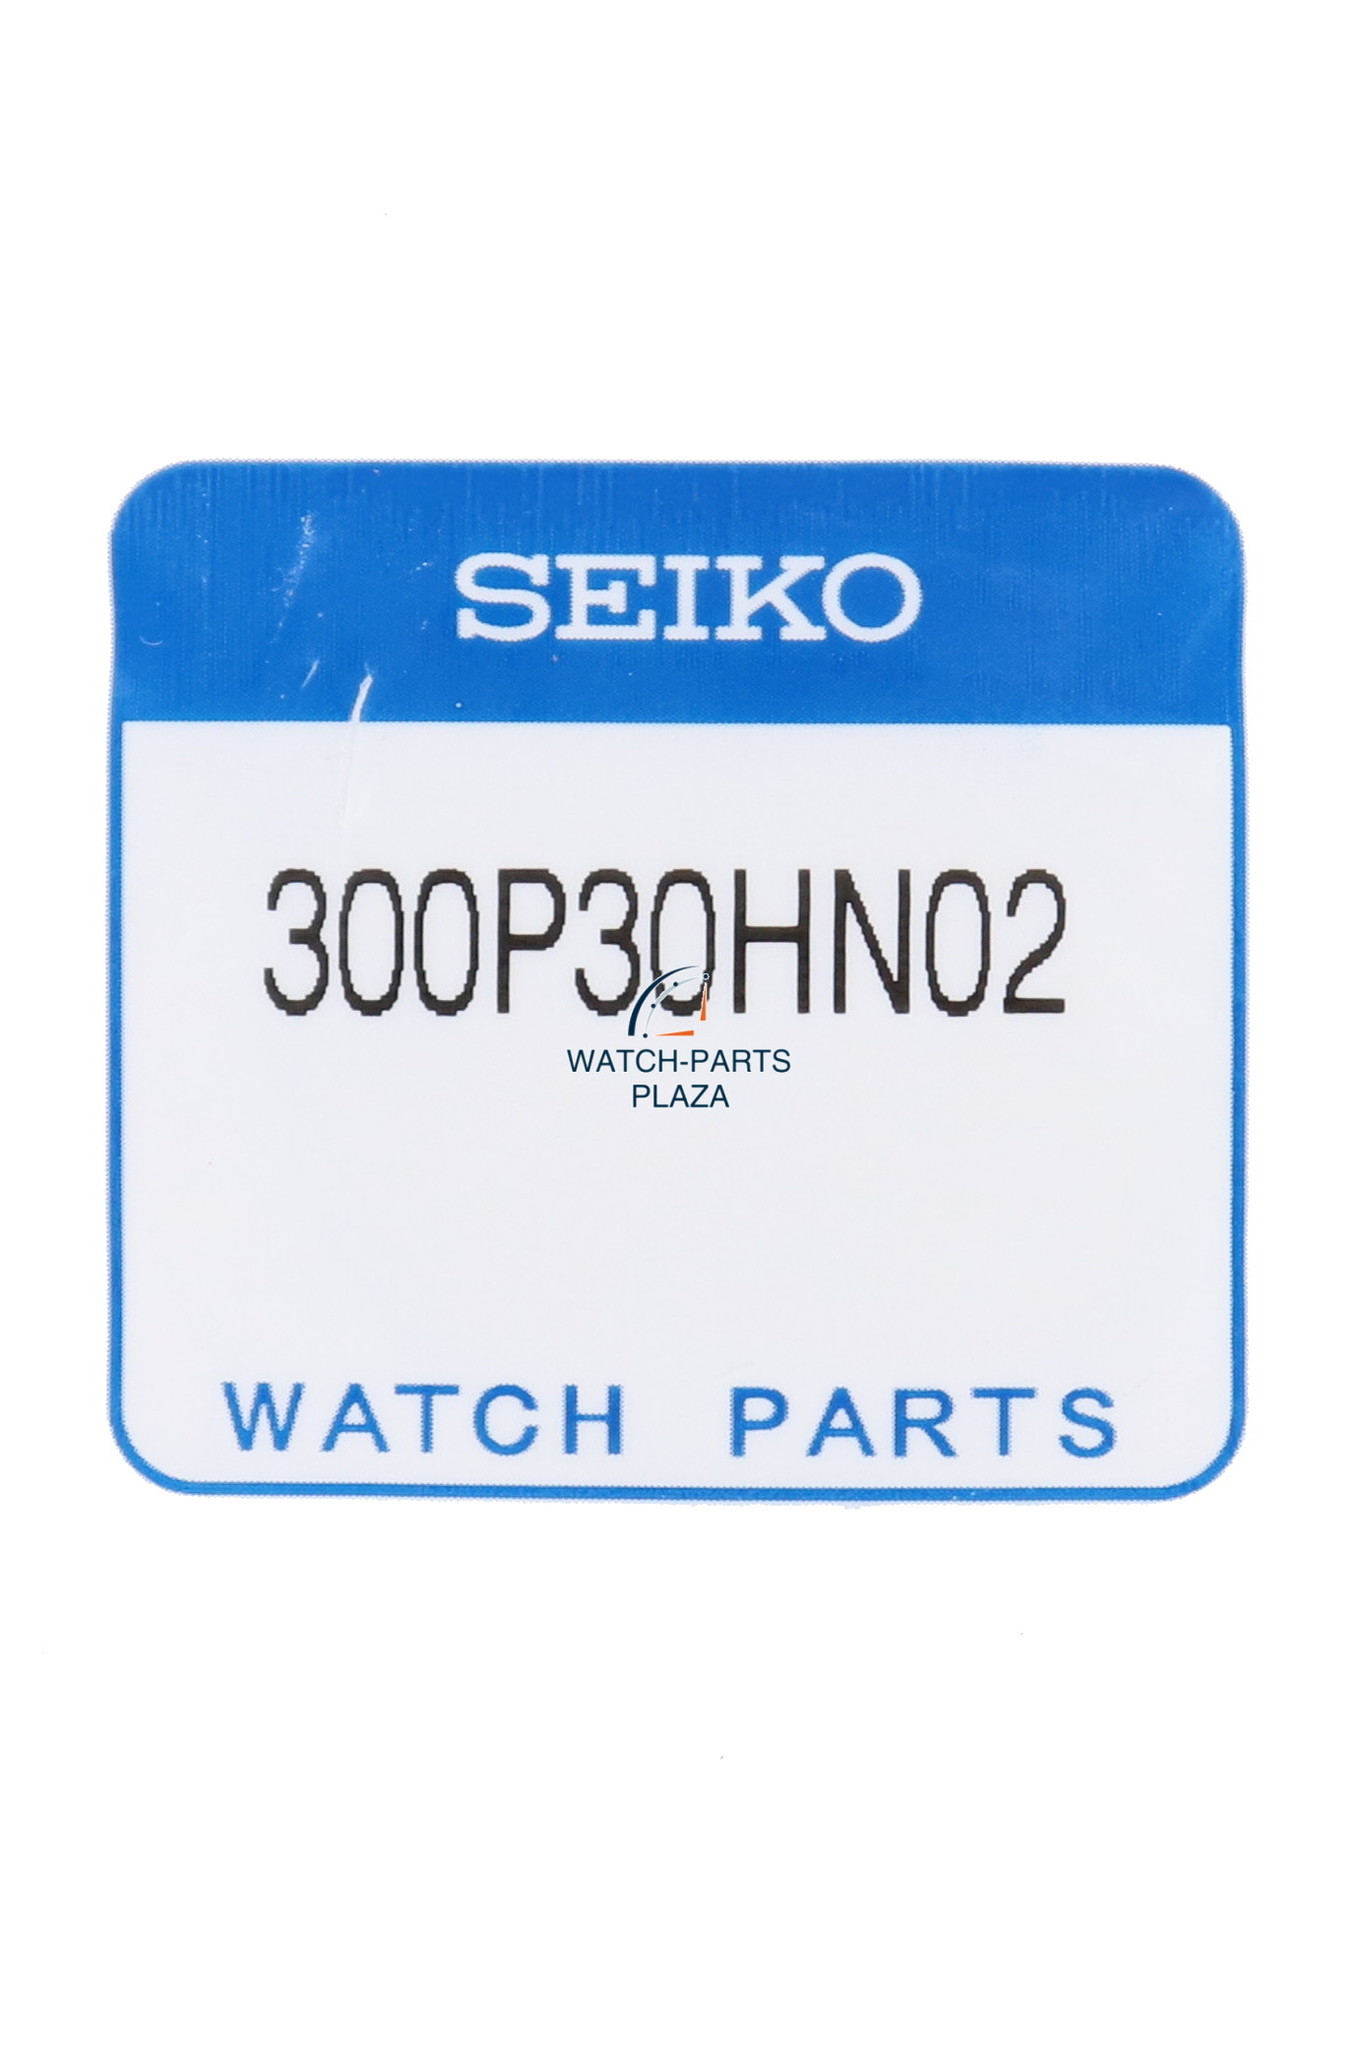 Genuine crystal glass for the Seiko 7N42-0BB0, 7T62-0BZ0 / 0AH0 - WatchPlaza